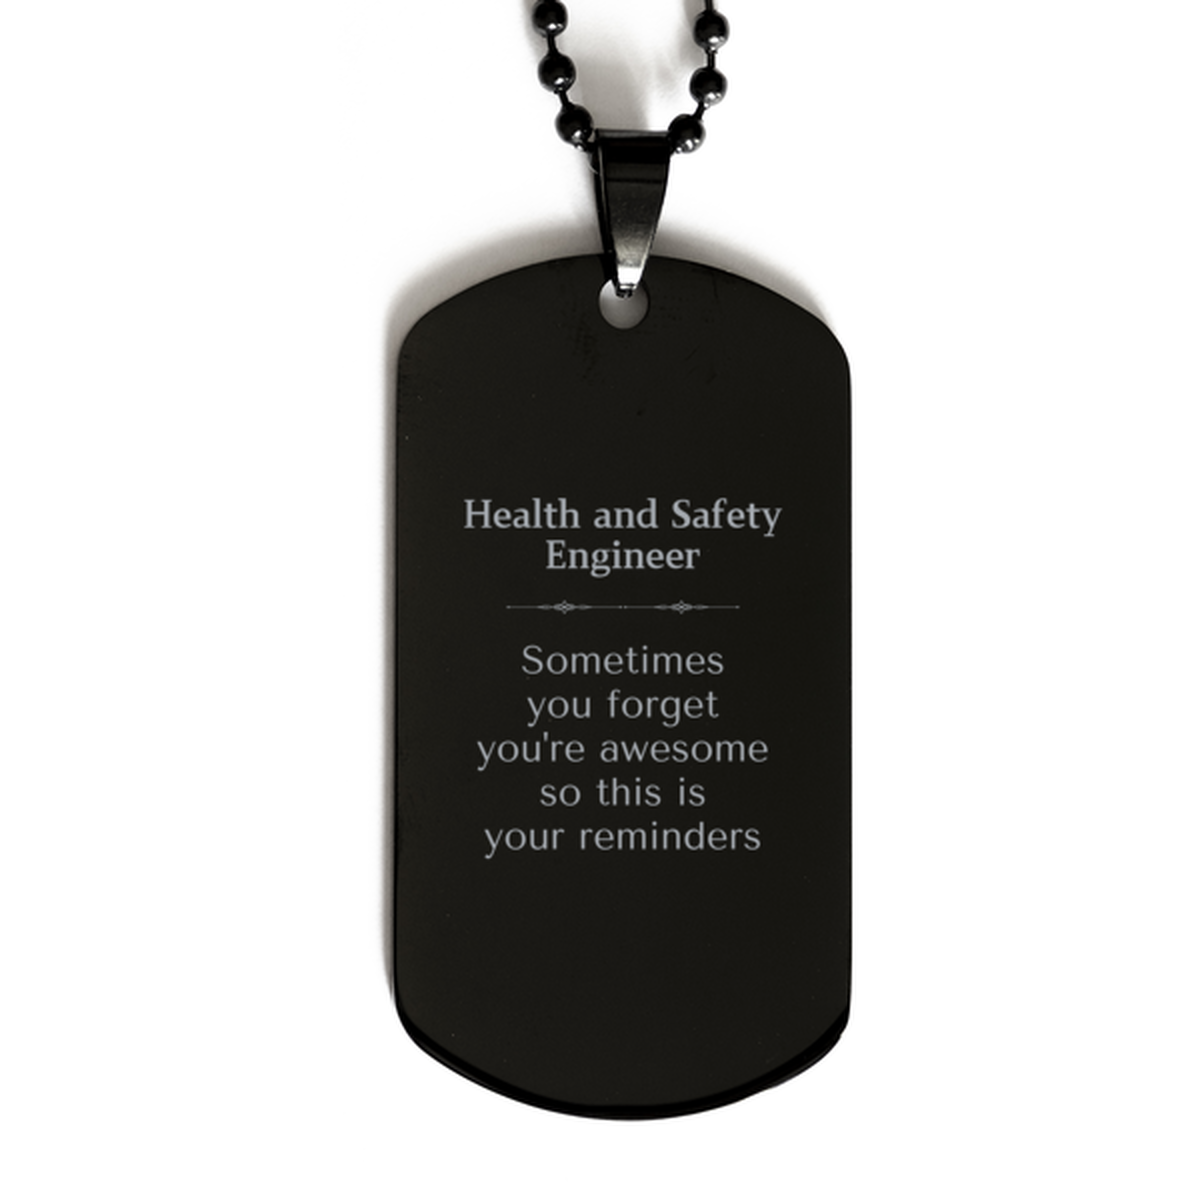 Sentimental Health and Safety Engineer Black Dog Tag, Health and Safety Engineer Sometimes you forget you're awesome so this is your reminders, Graduation Christmas Birthday Gifts for Health and Safety Engineer, Men, Women, Coworkers